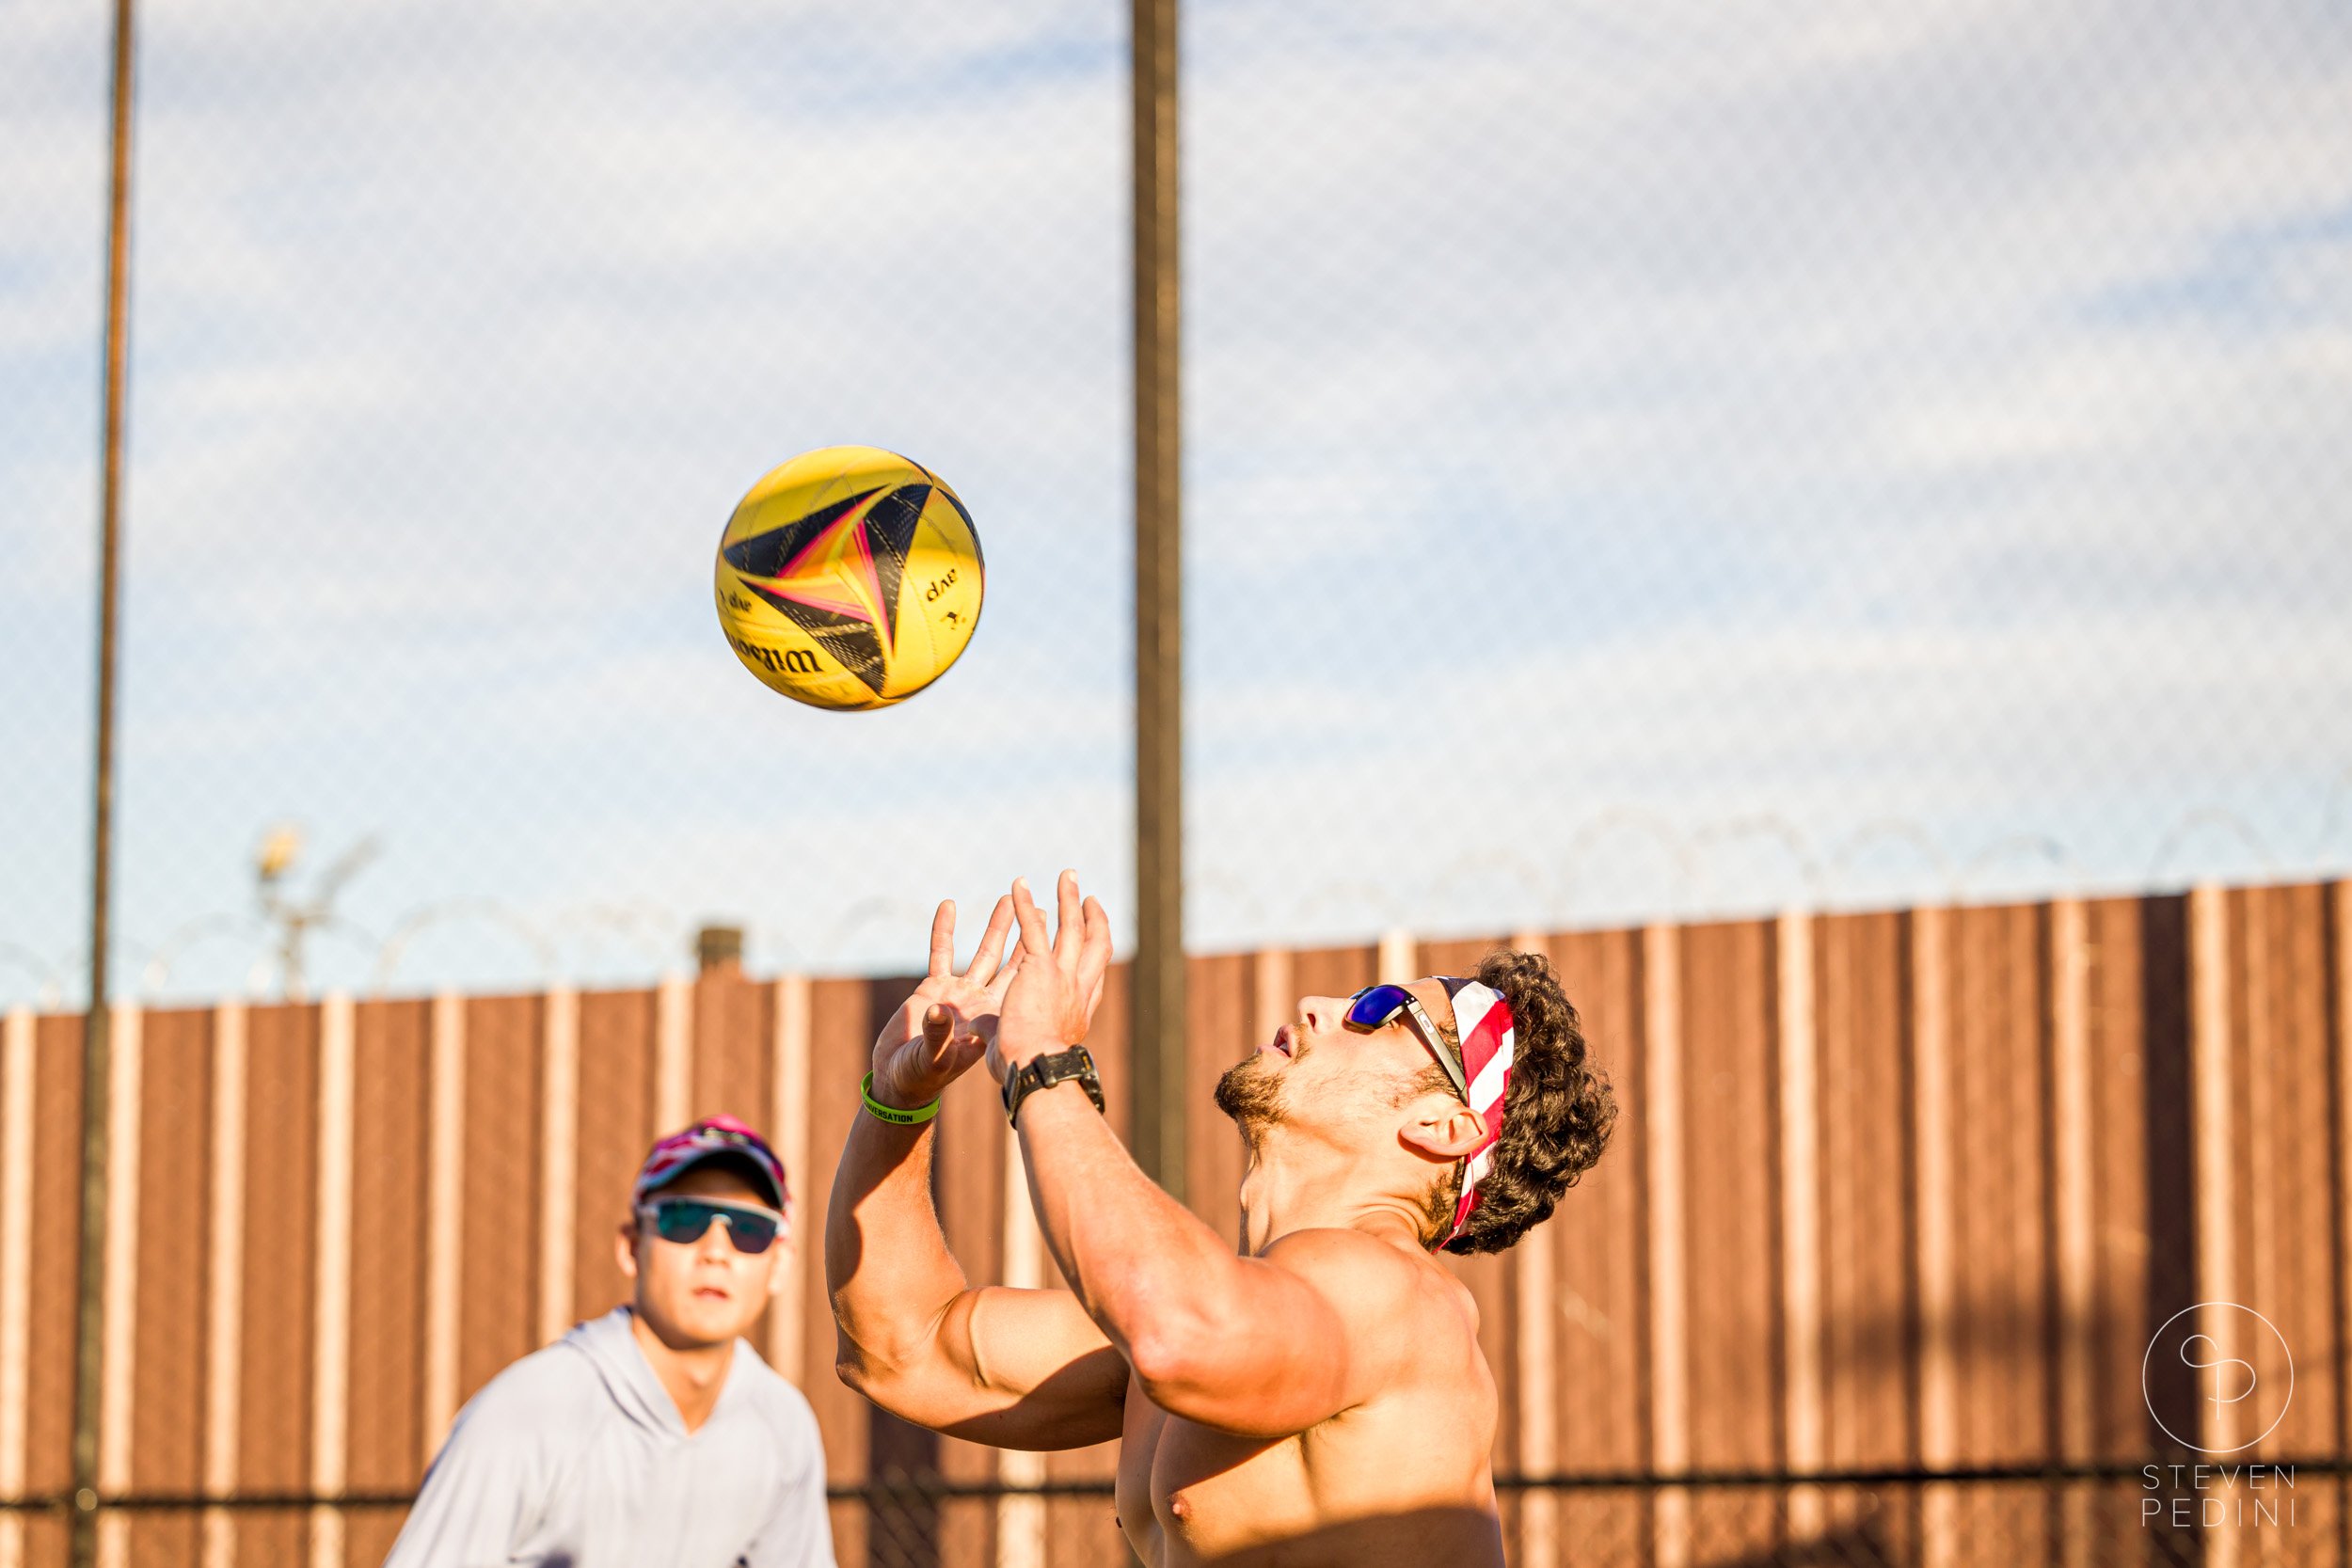 Steven Pedini Photography - Bumpy Pickle - Sand Volleyball - Houston TX - World Cup of Volleyball - 00133.jpg